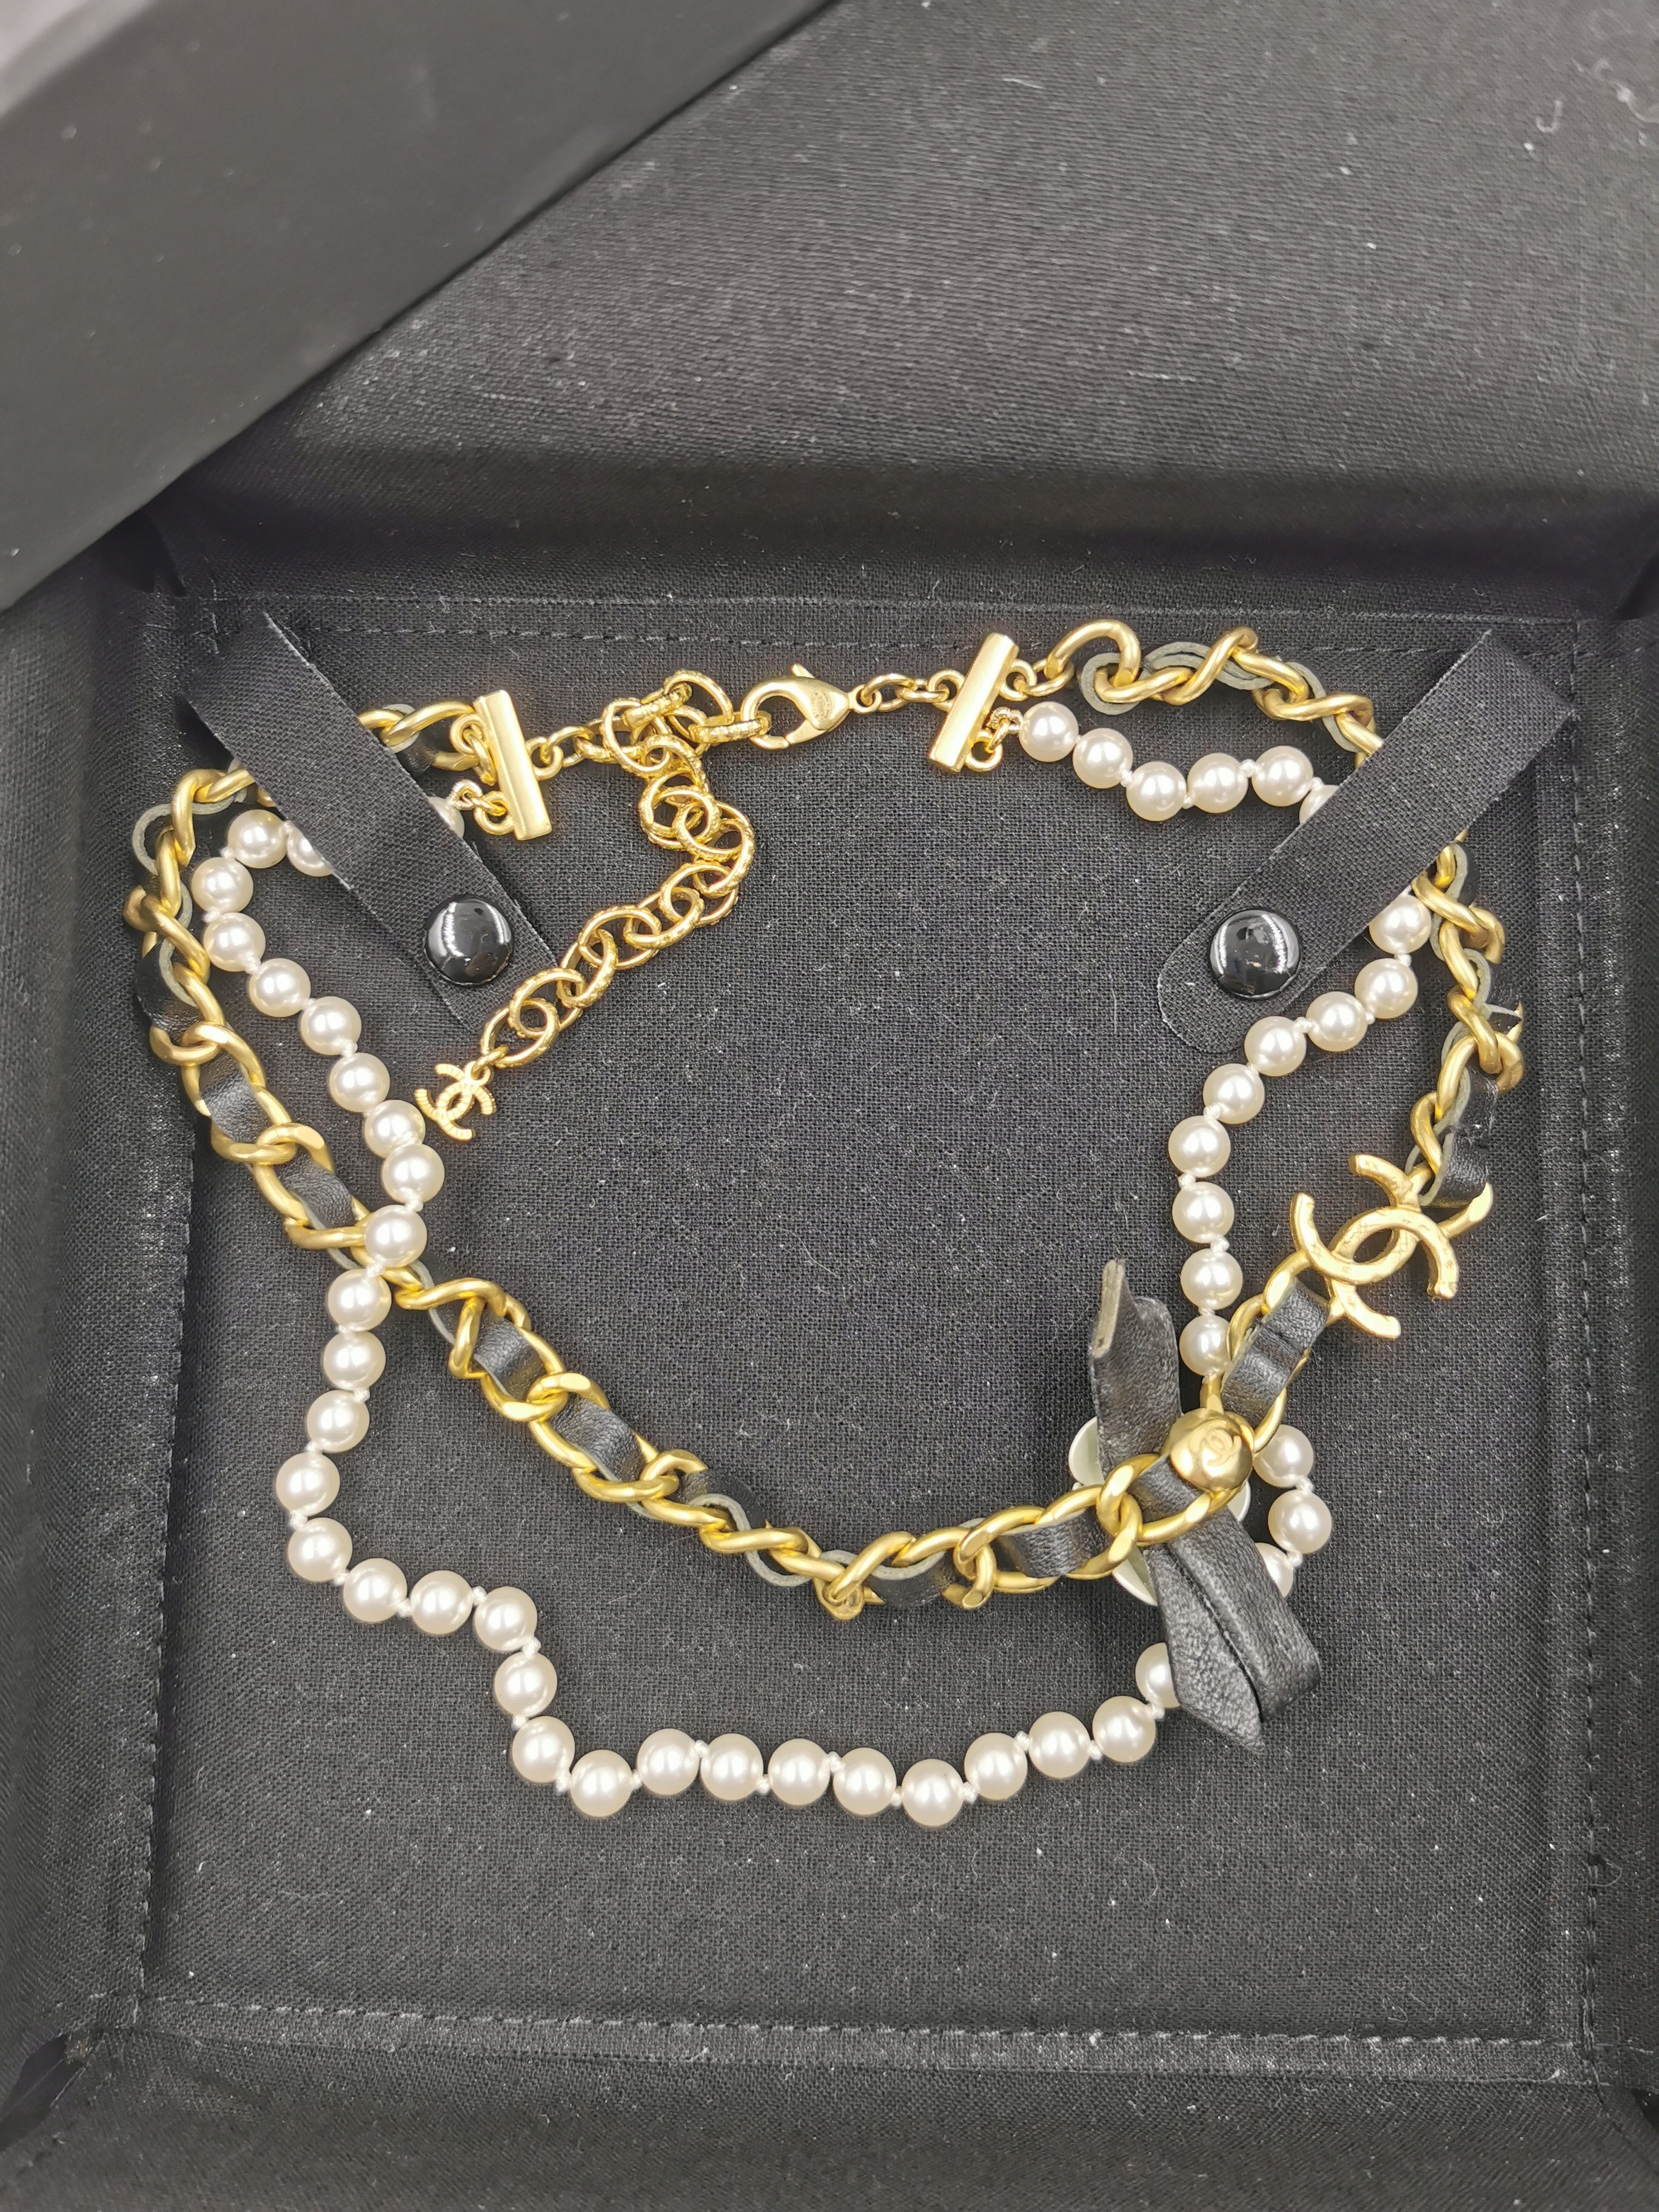 CHANEL 2020 Camellia Choker.

Feature
Material: Metal
Color: Gold
Condition: Good, with some mark on metal as pictured.
Period: 2020
Place of Origin: France